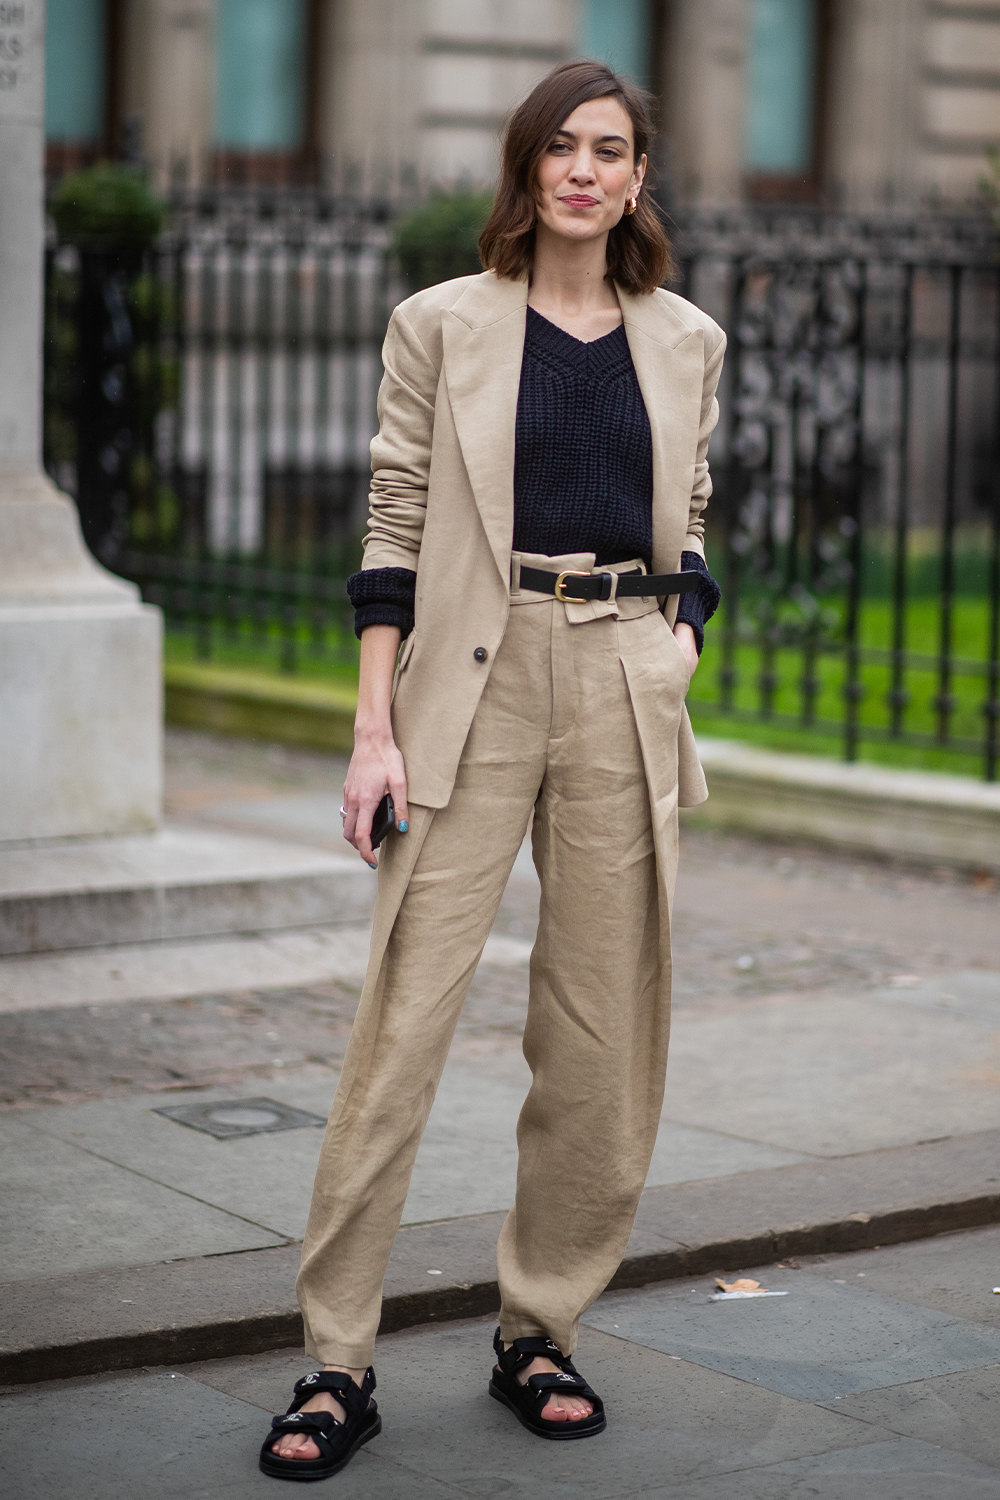 5 Alexa Chung Street Style Outfits That I Still Want to Copy